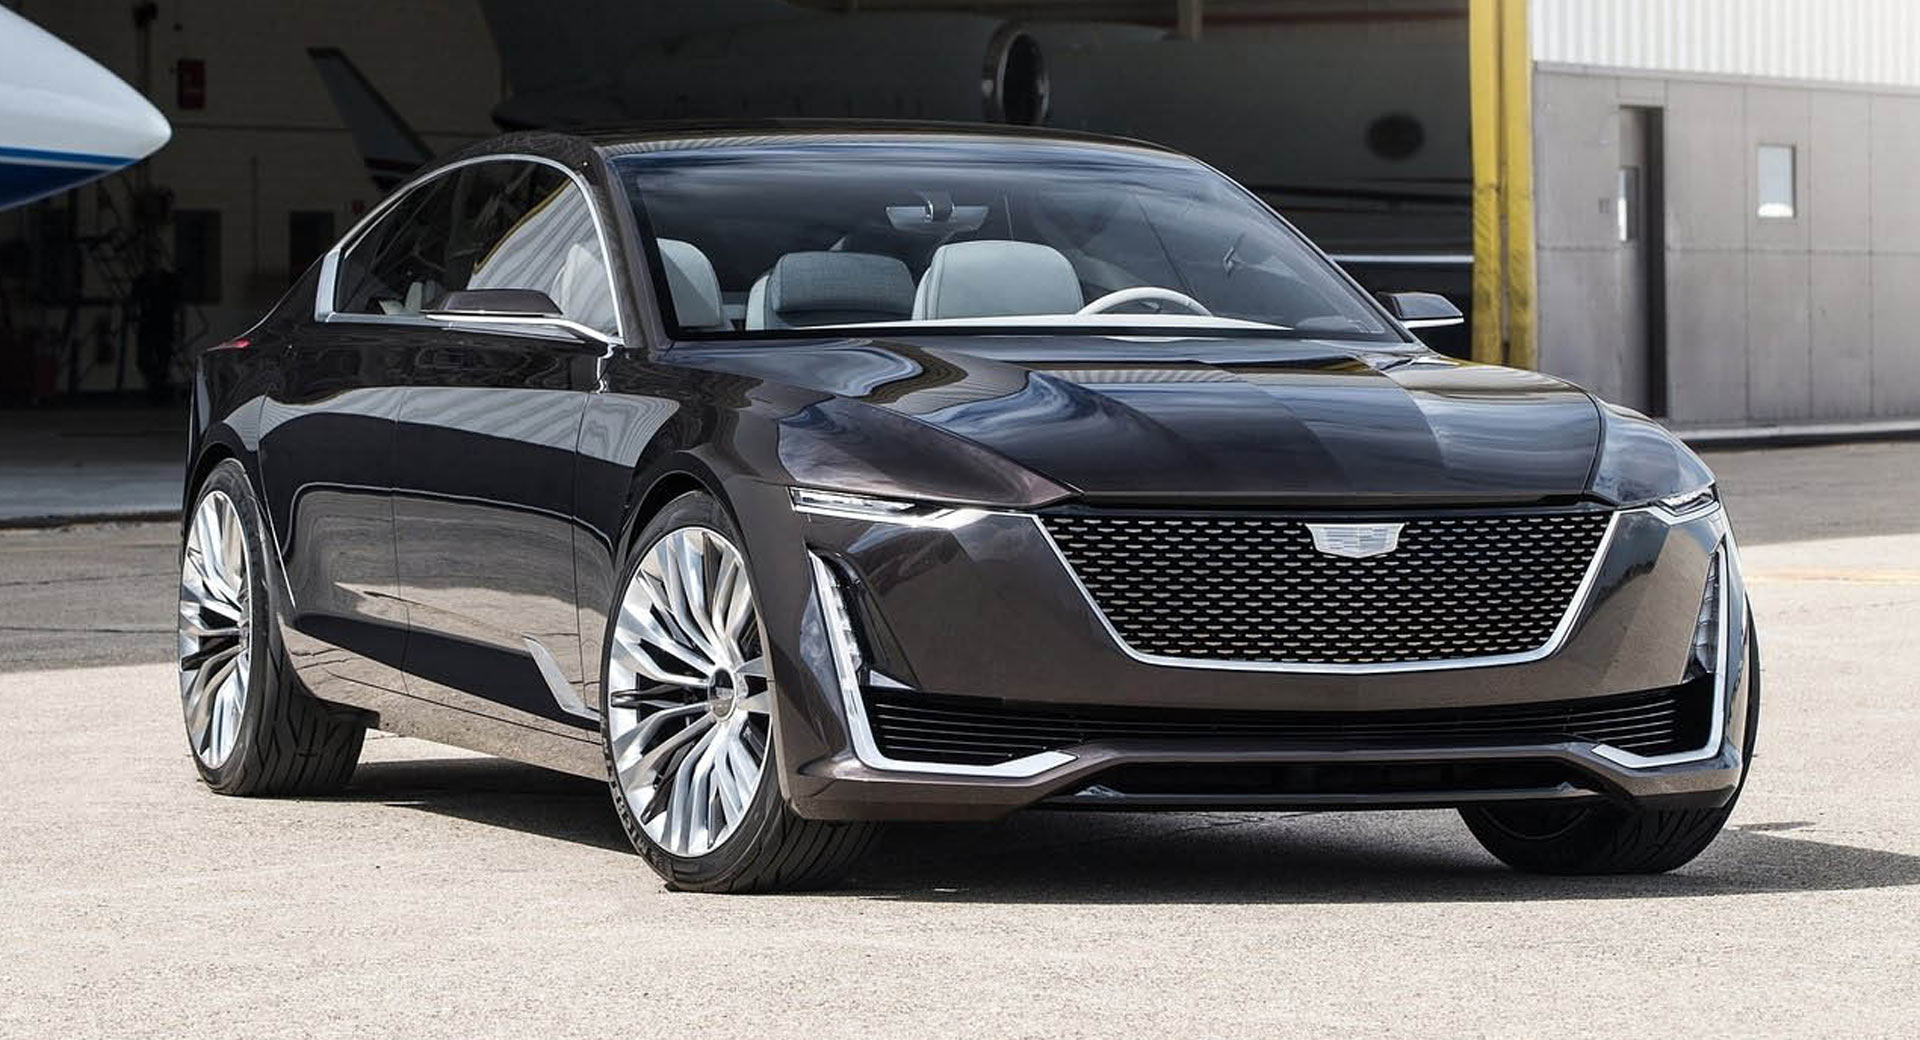 Electric Cadillac Celestiq To Cost At Least $200,000 | Carscoops